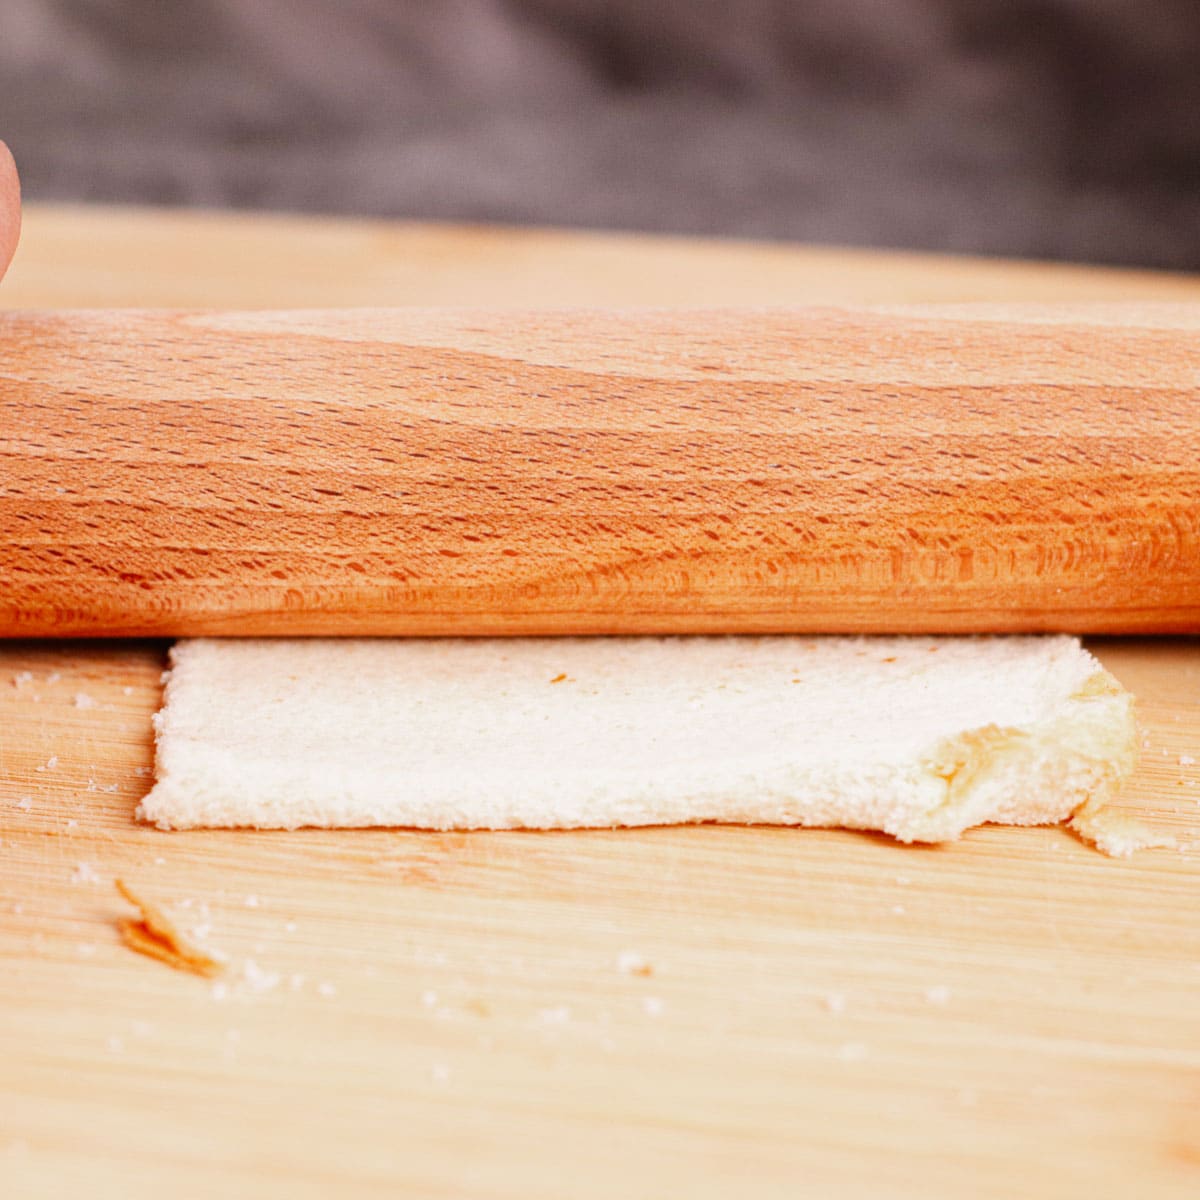 Flattening the bread with a rolling pin.